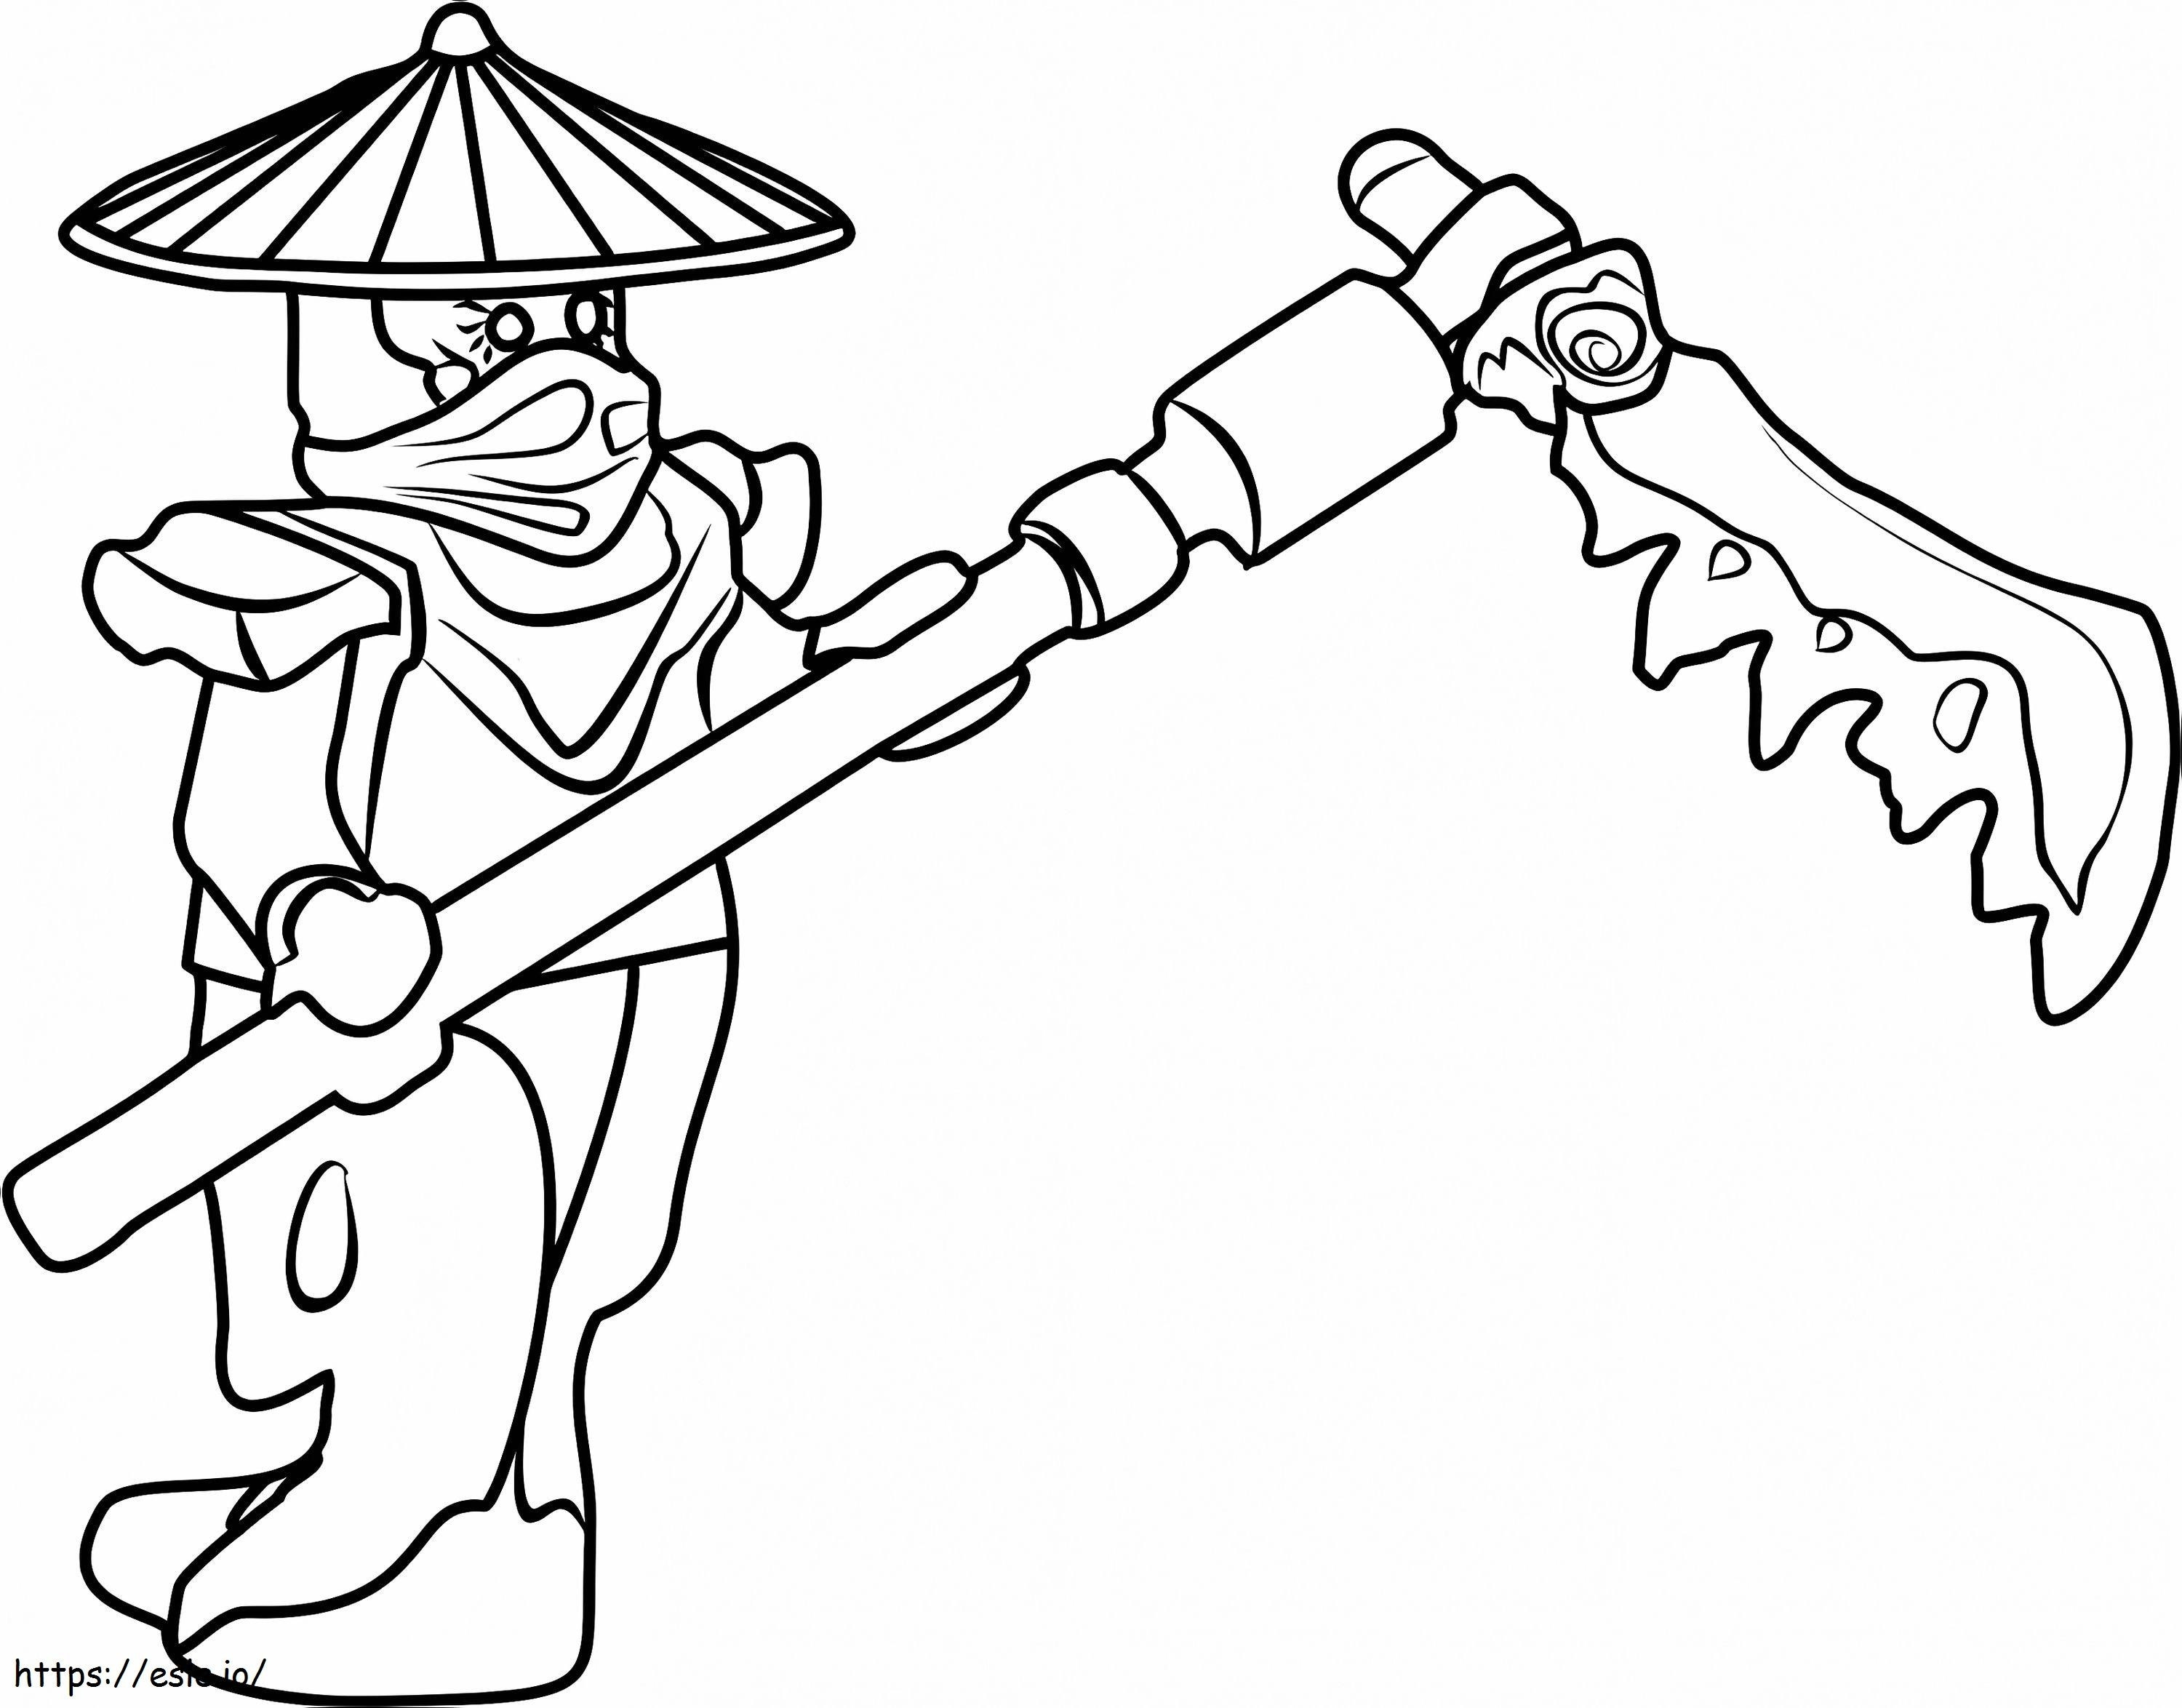 Lego Ninja With Scythe coloring page